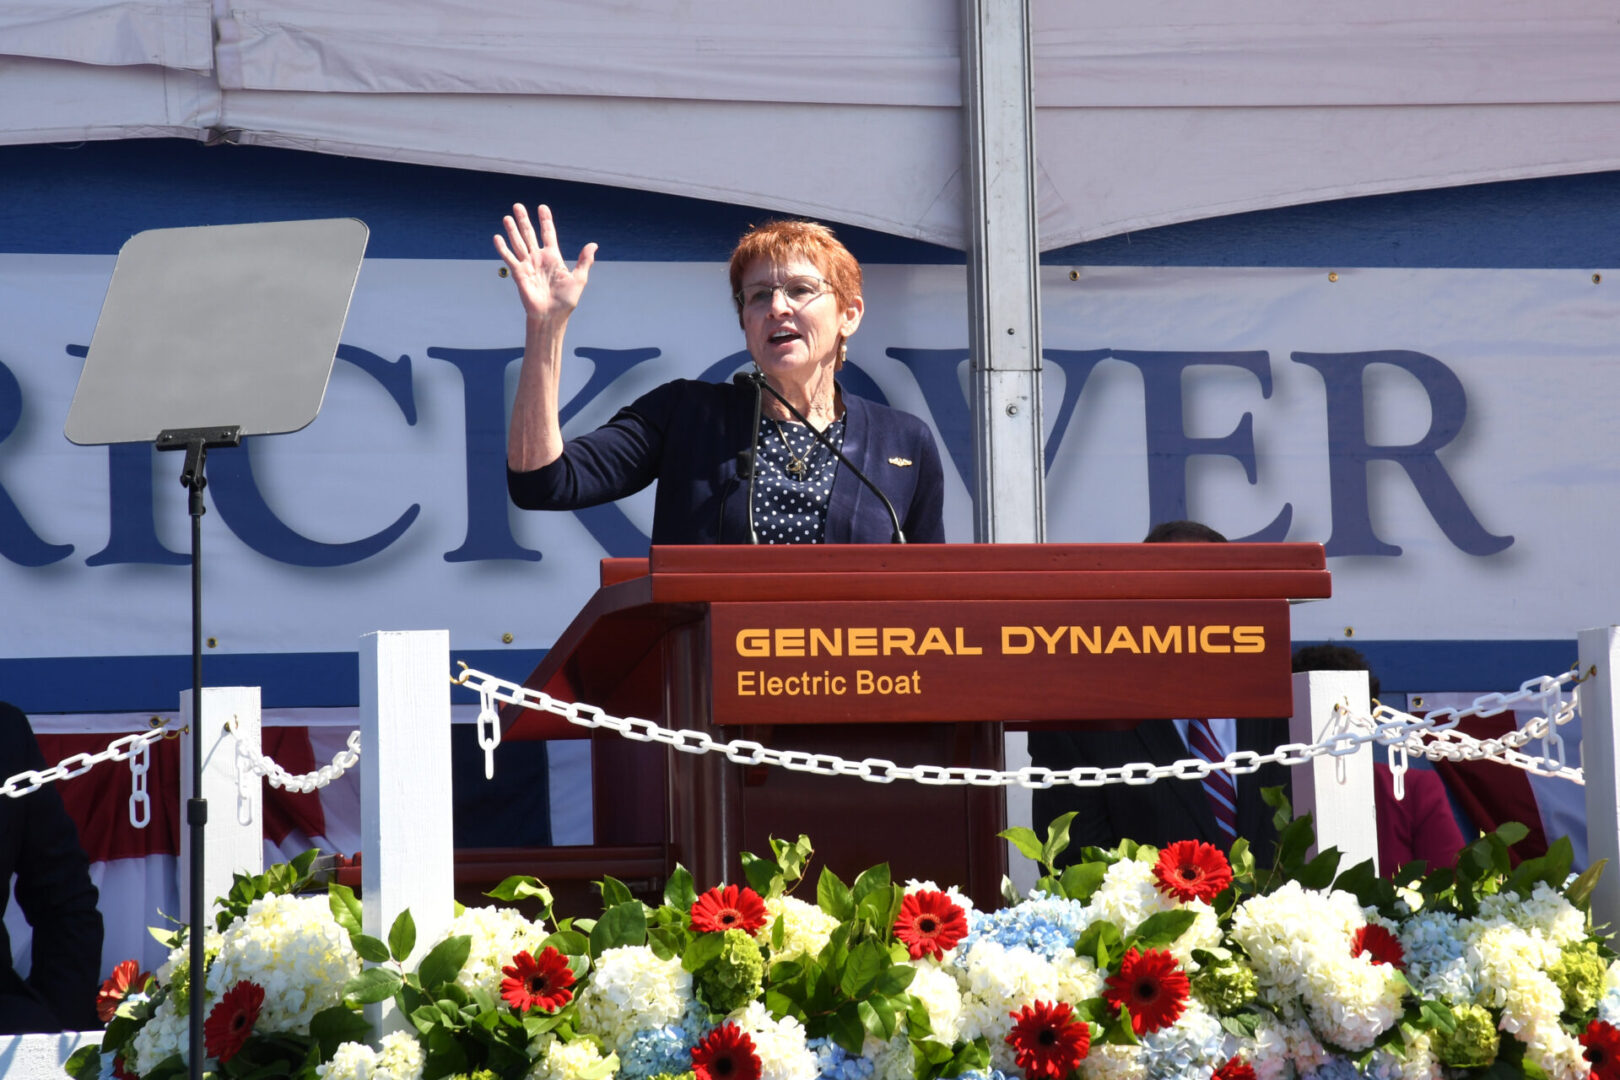 210731-N-GR655-164 GROTON, Conn. (July 31, 2021) – Darleen Greenert, sponsor of the pre-commissioning unit (PCU) Hyman G. Rickover (SSN 795), delivers remarks during a christening ceremony at General Dynamics Electric Boat shipyard facility in Groton, Conn., July 31, 2021. Rickover and crew will operate under Submarine Squadron (SUBRON) FOUR whose primary mission is to provide attack submarines that are ready, willing, and able to meet the unique challenges of undersea combat and deployed operations in unforgiving environments across the globe. (U.S. Navy photo by Chief Petty Officer Joshua Karsten/RELEASED)